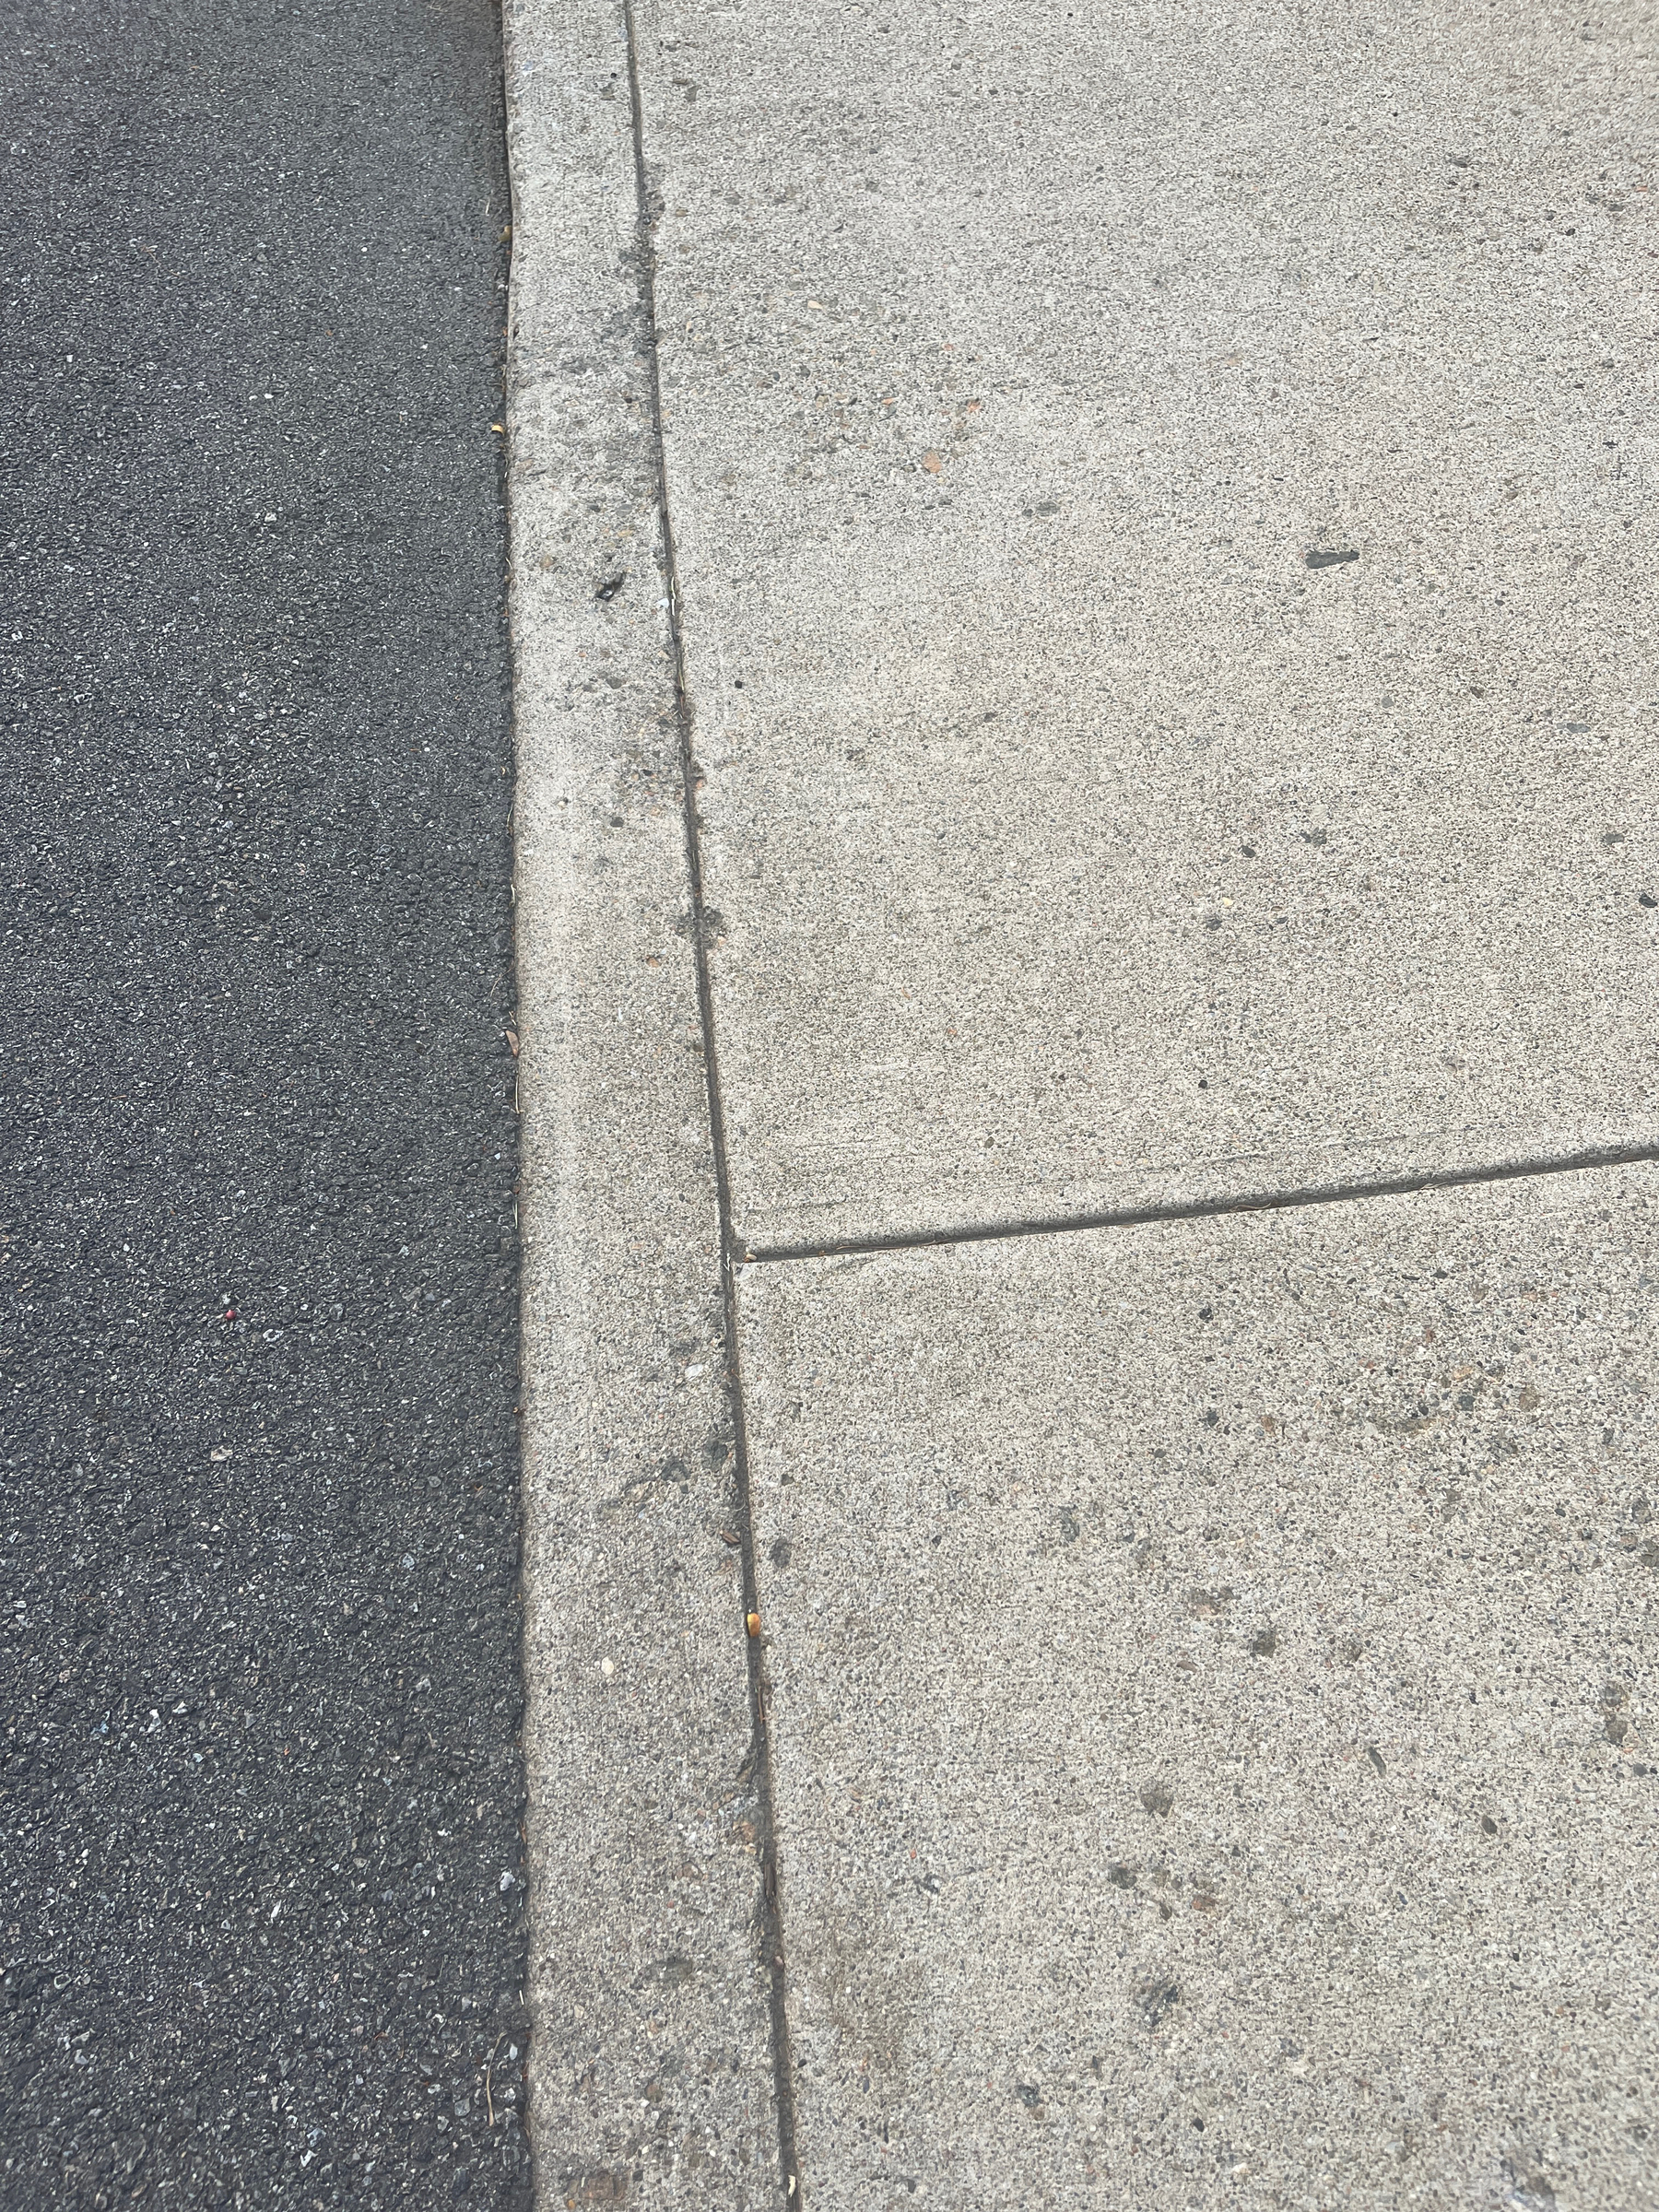 Line between asphalt on the left and concrete sidewalk on the right, line runs from top to bottom of frame and there are joints in the concrete, one running parallel to the asphalt/concrete dividing line and the other running perpendicular about 1/3 of frame from bottom.